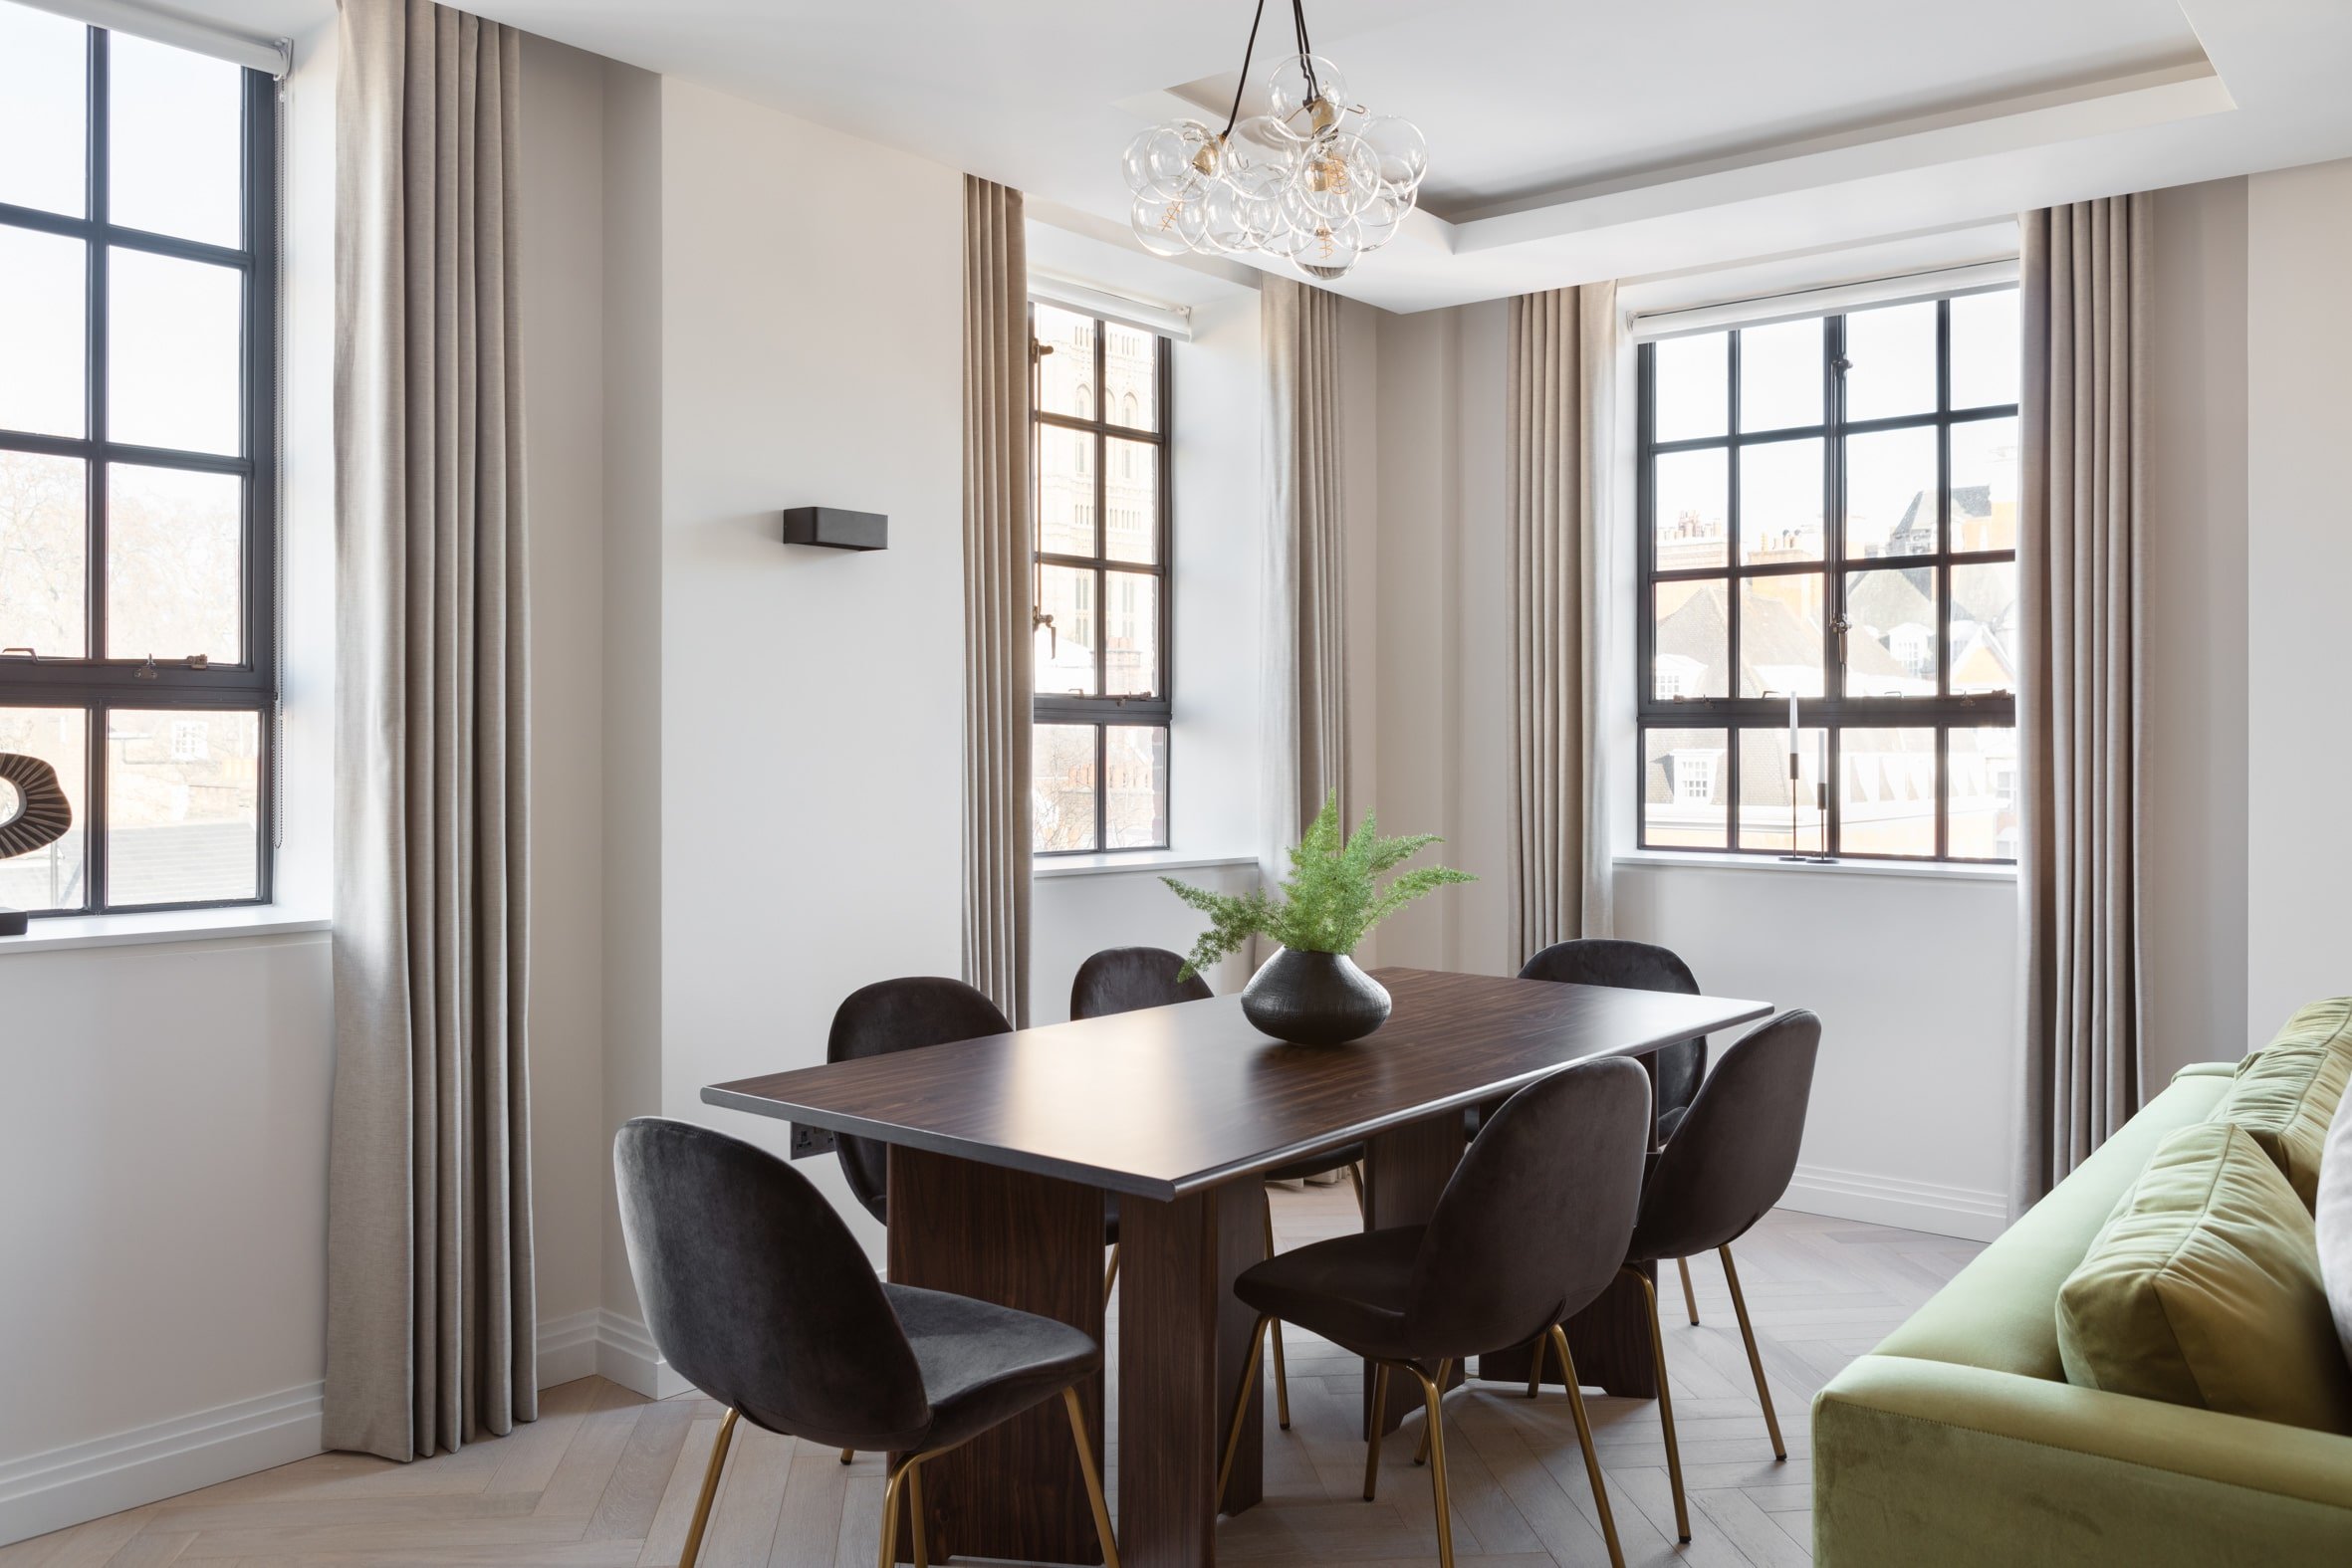 3. 3  Bed Westminster Amphora Apartments Dining.jpg